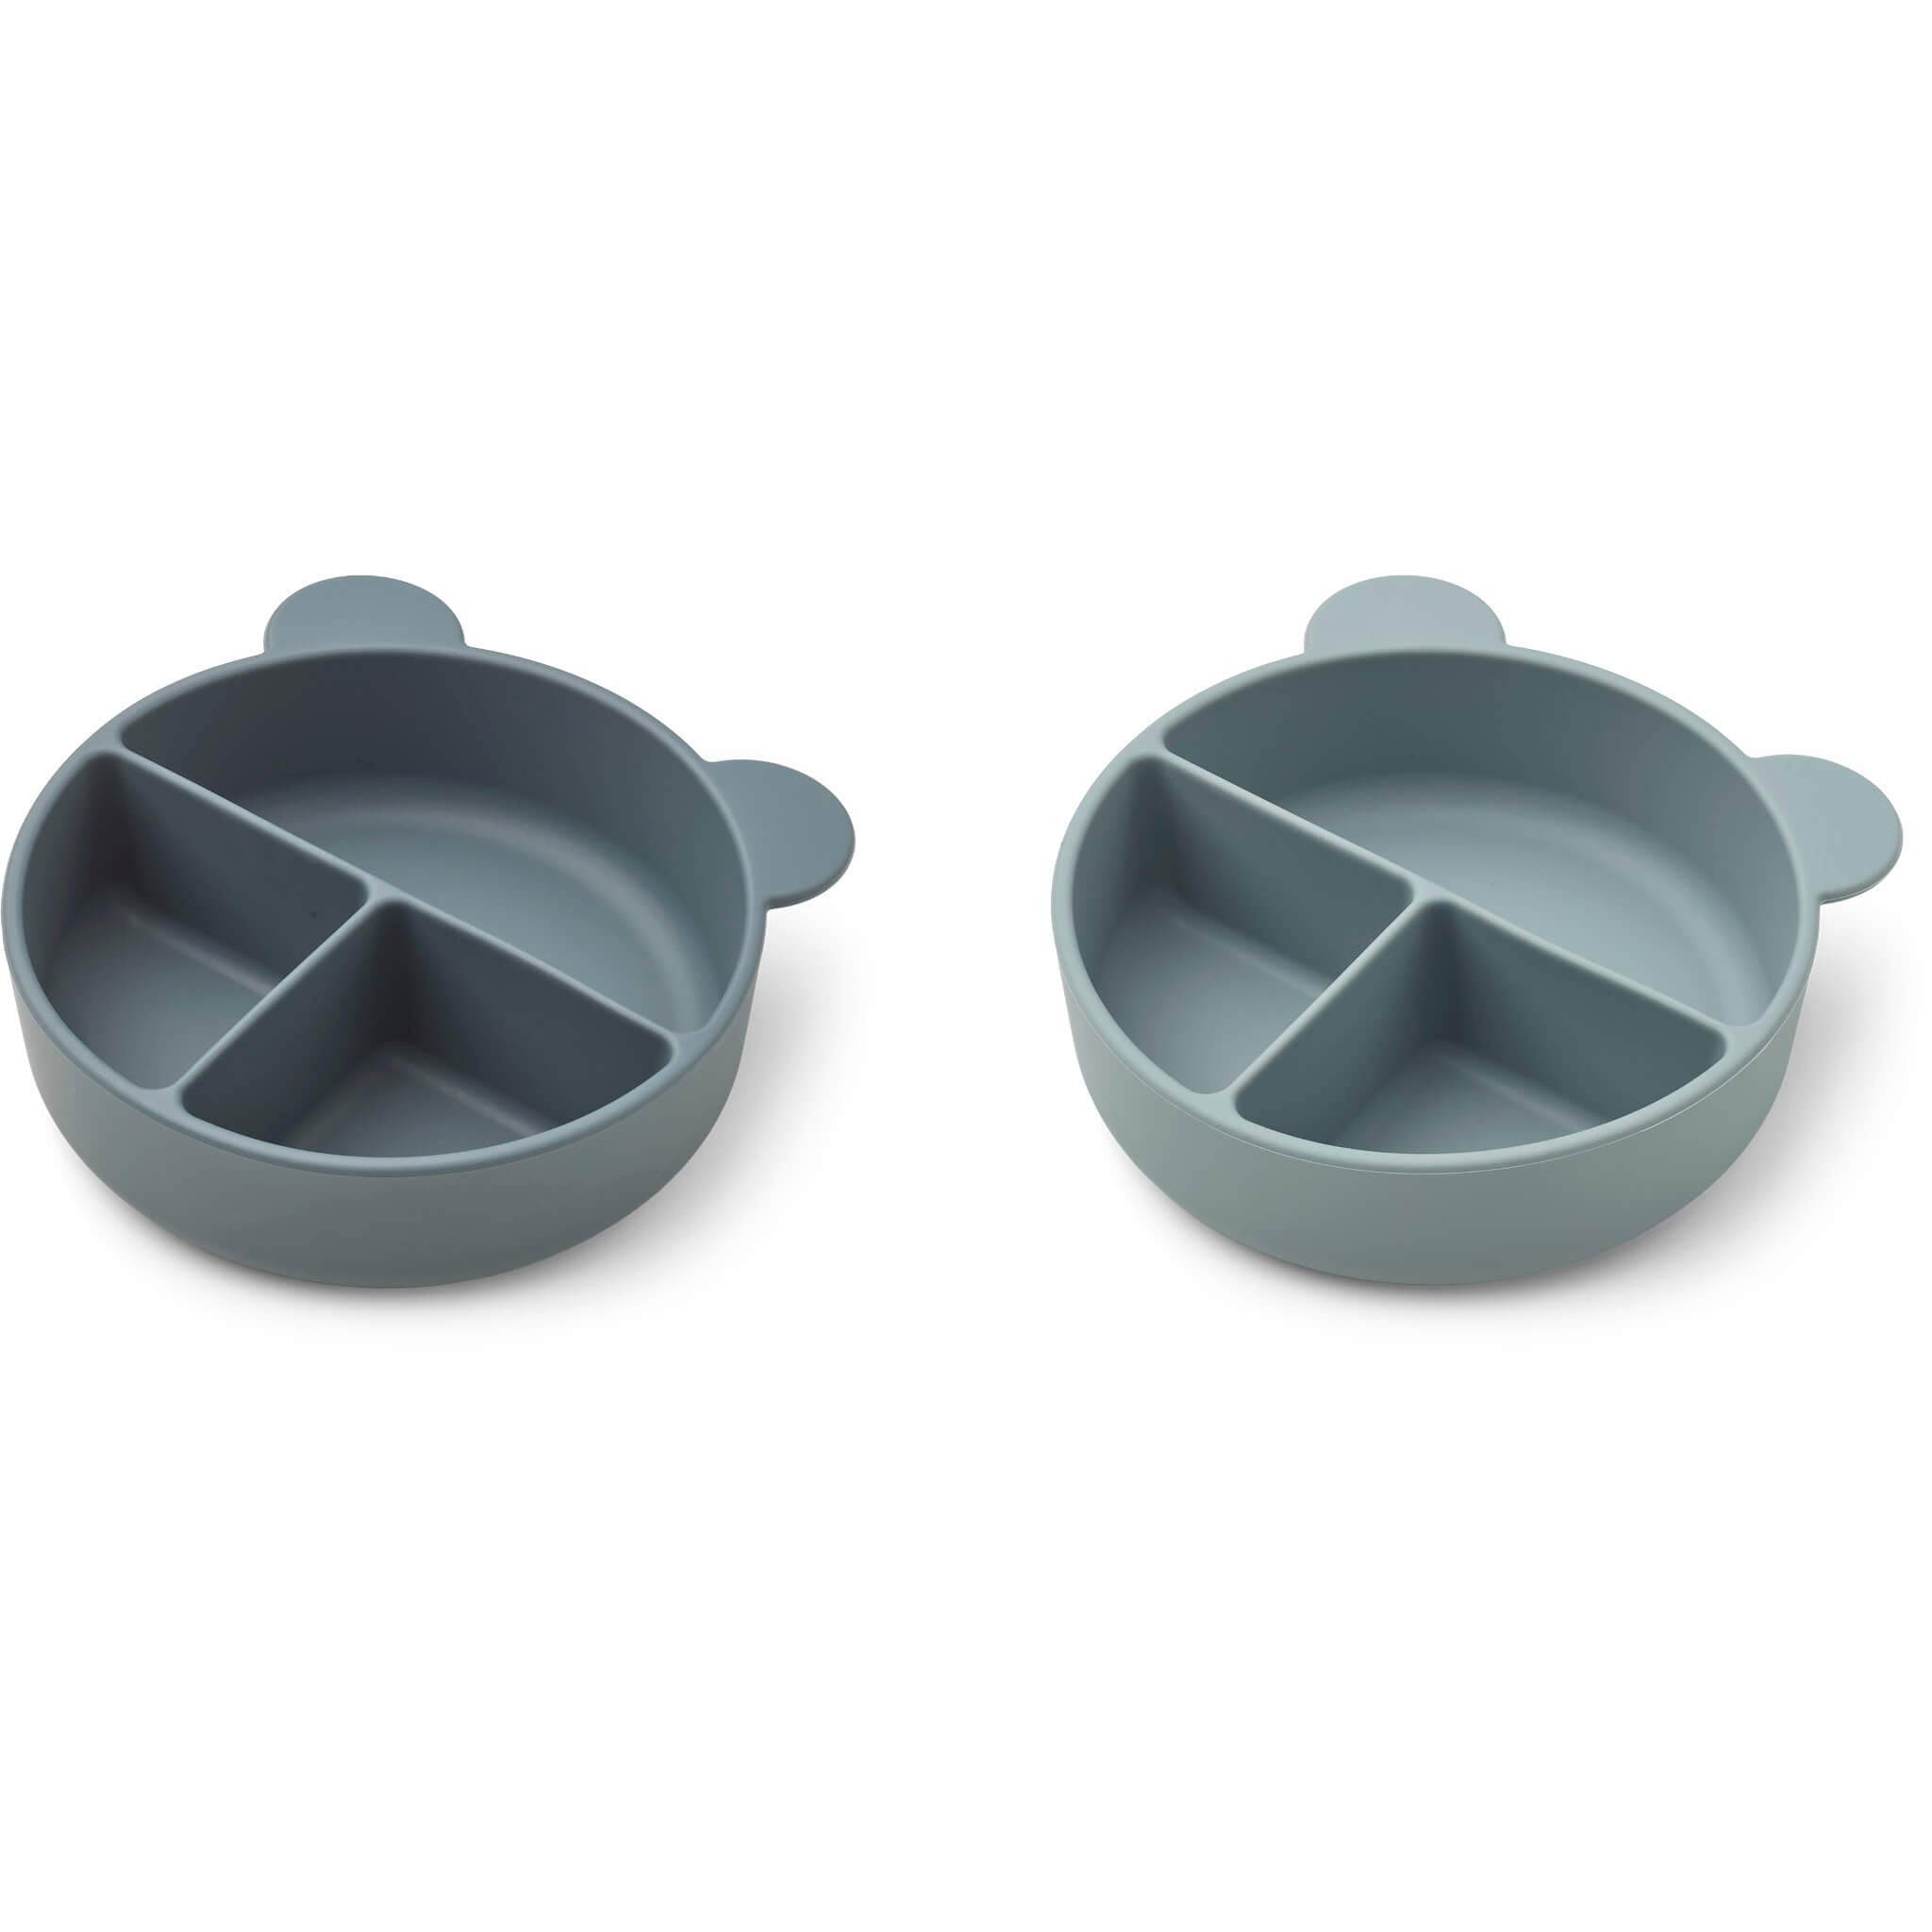 Connie Divider Bowl - Blue (2 Pack)